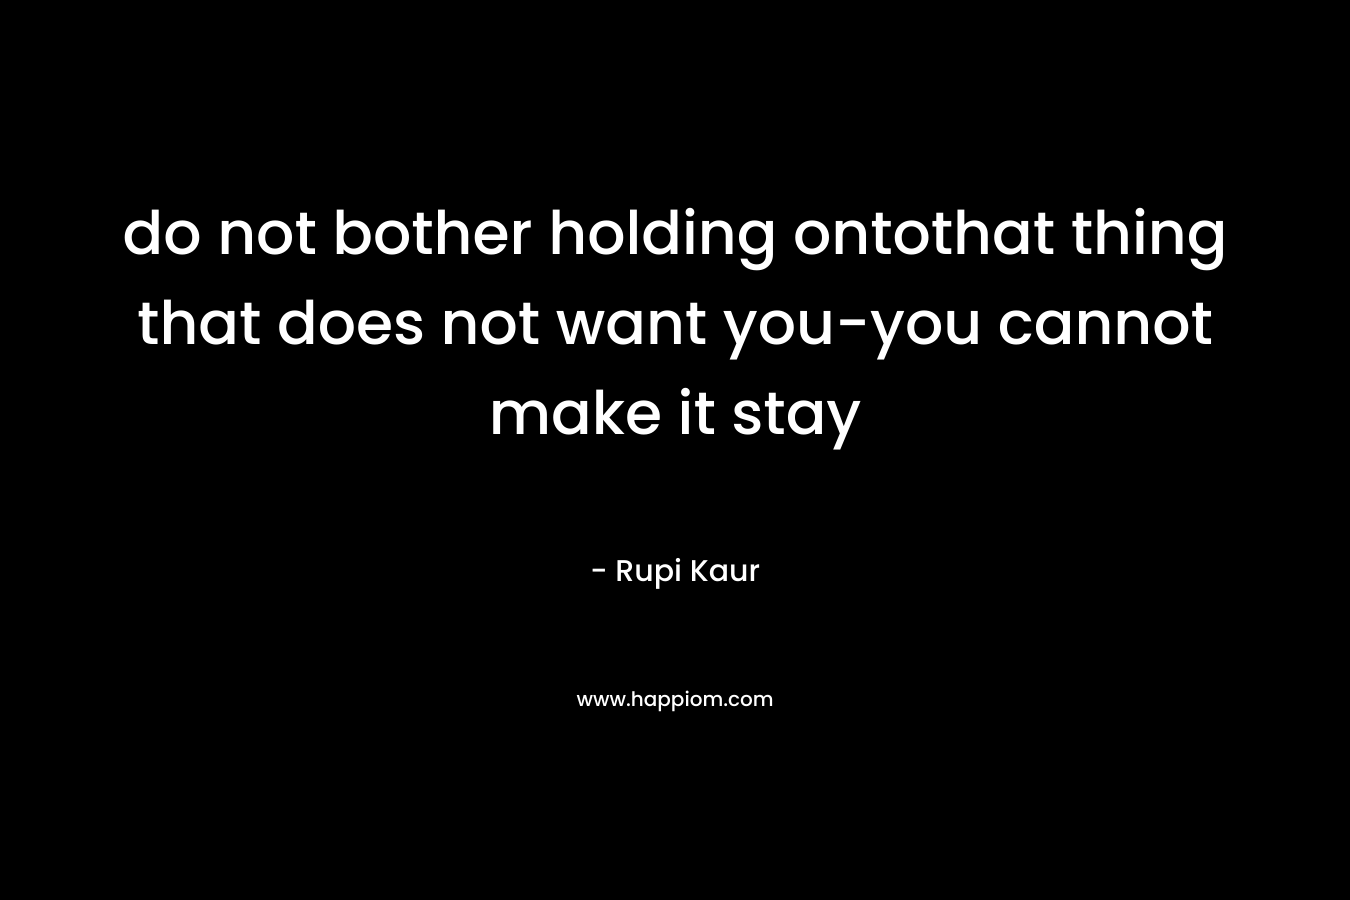 do not bother holding ontothat thing that does not want you-you cannot make it stay – Rupi Kaur